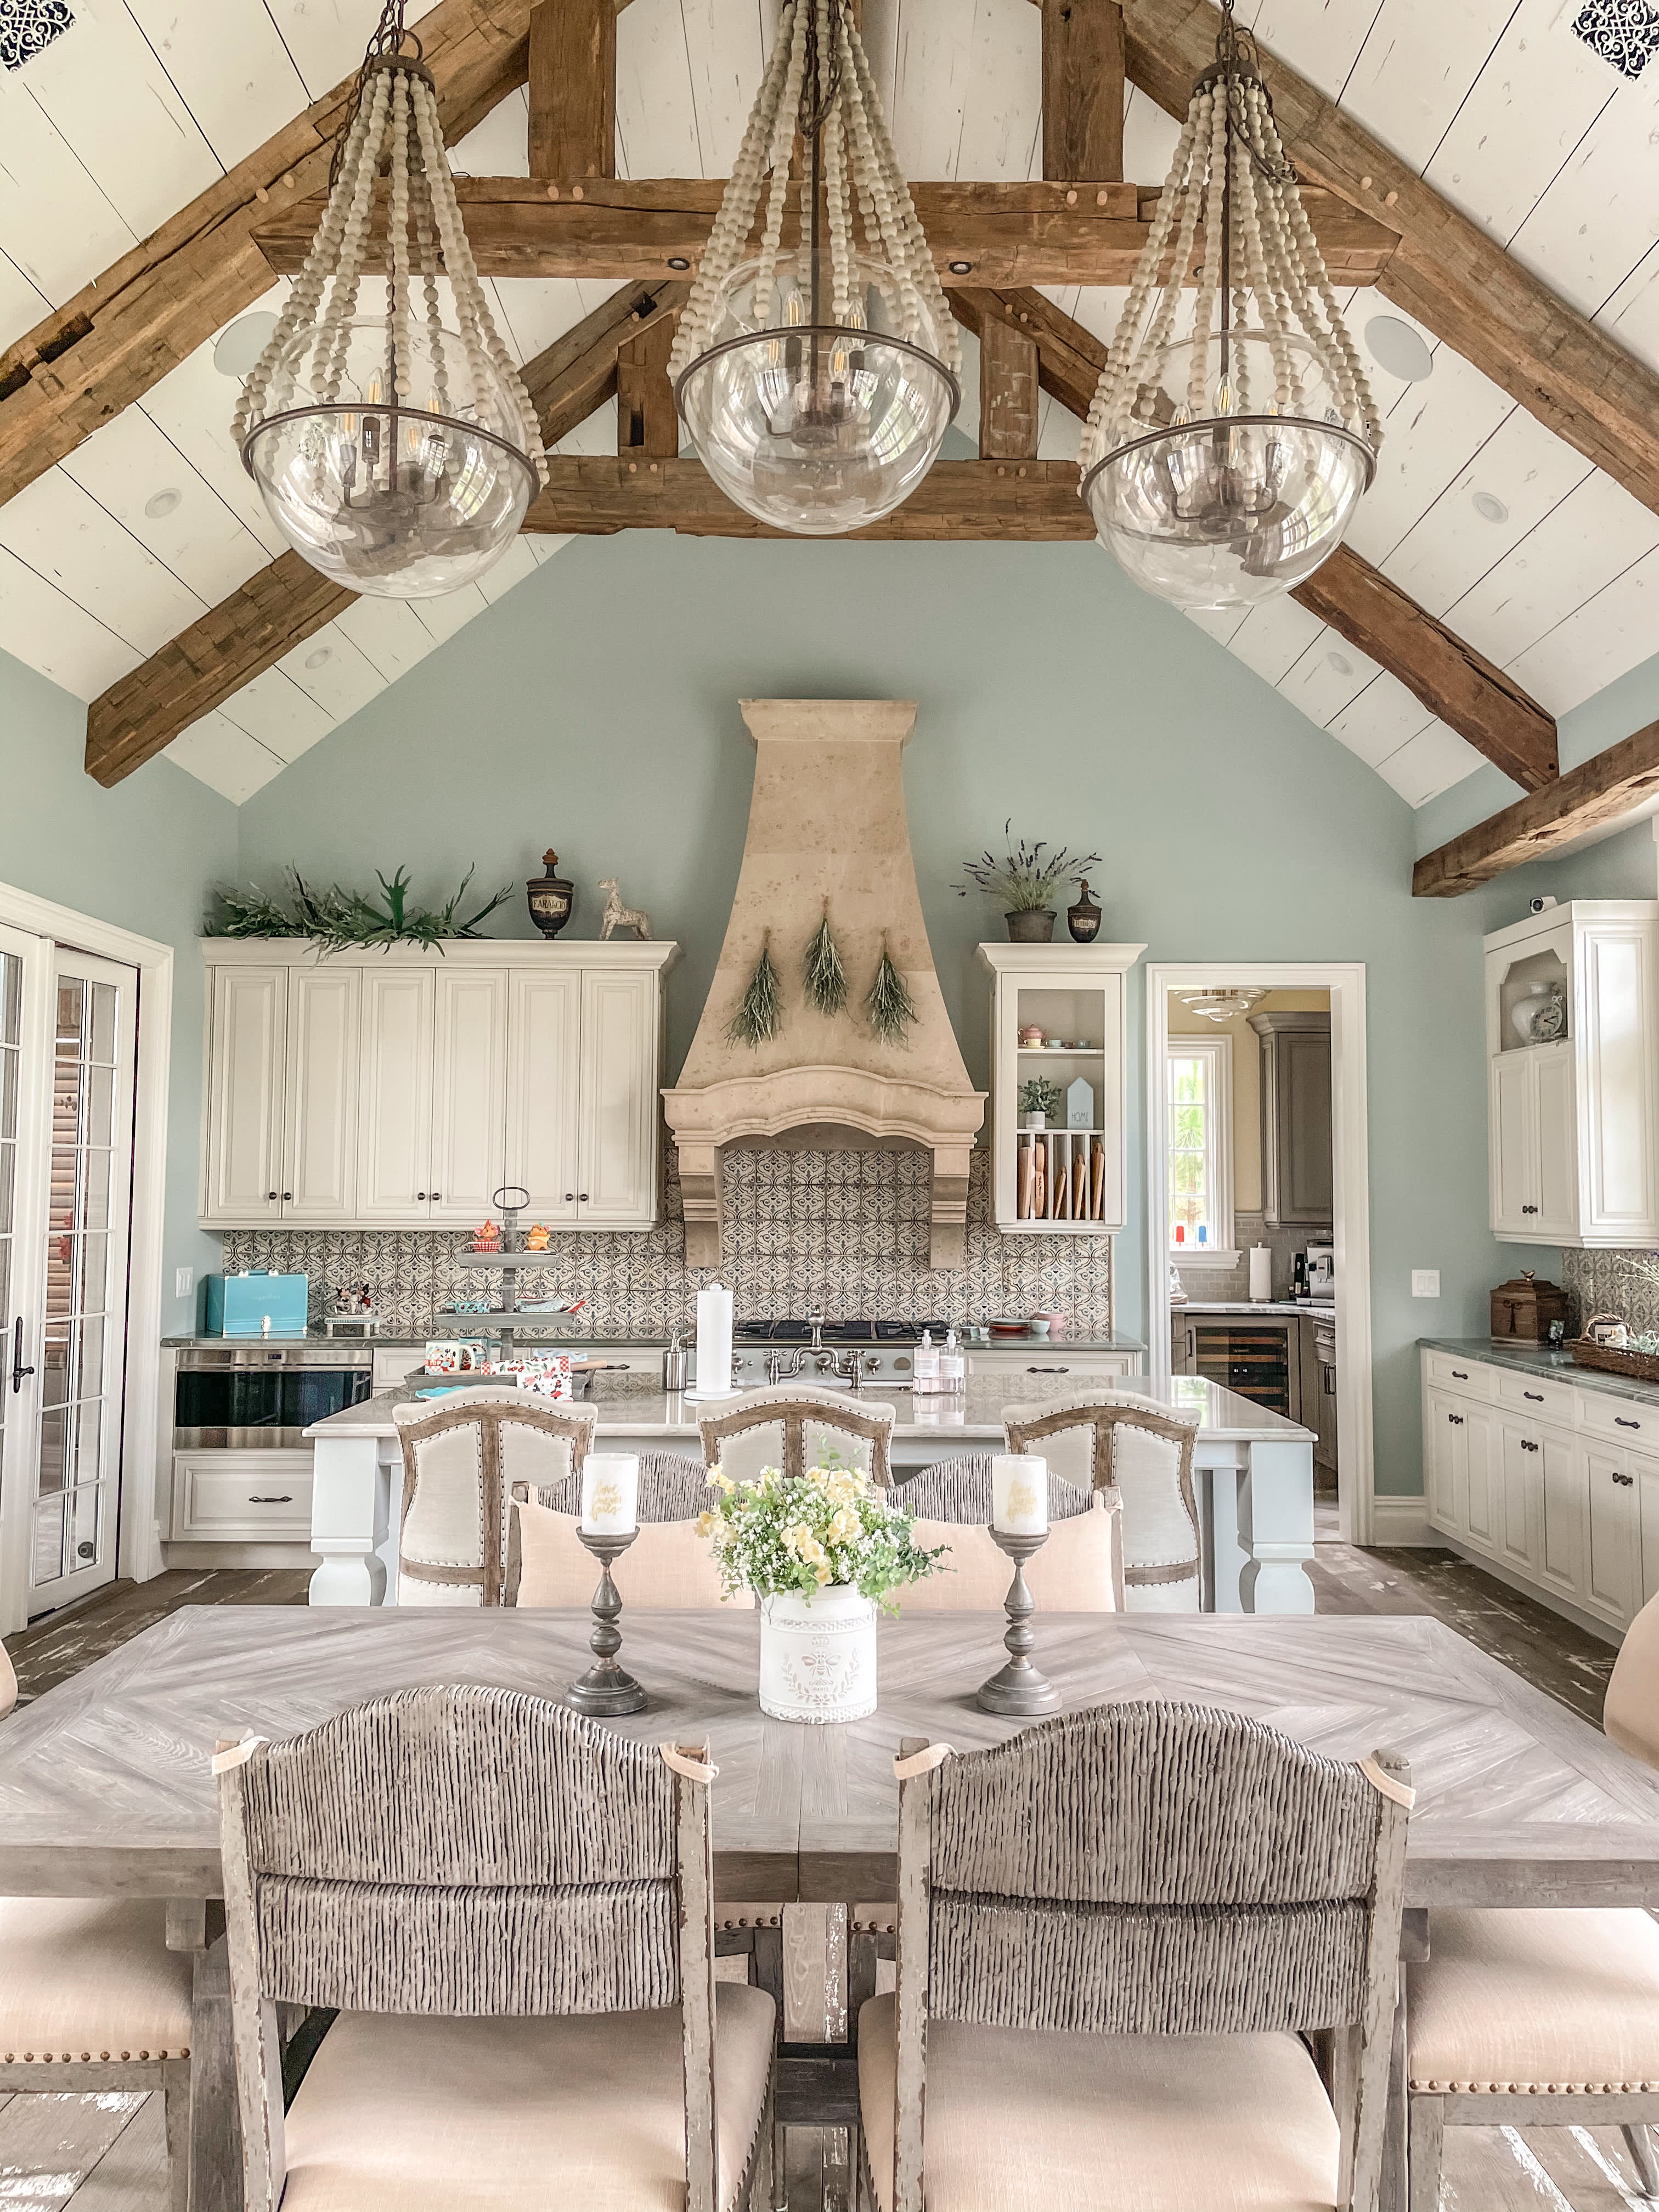 Distressed wooden details, intricate tiles and a towering kitchen hood give the space a French-countryside feel.